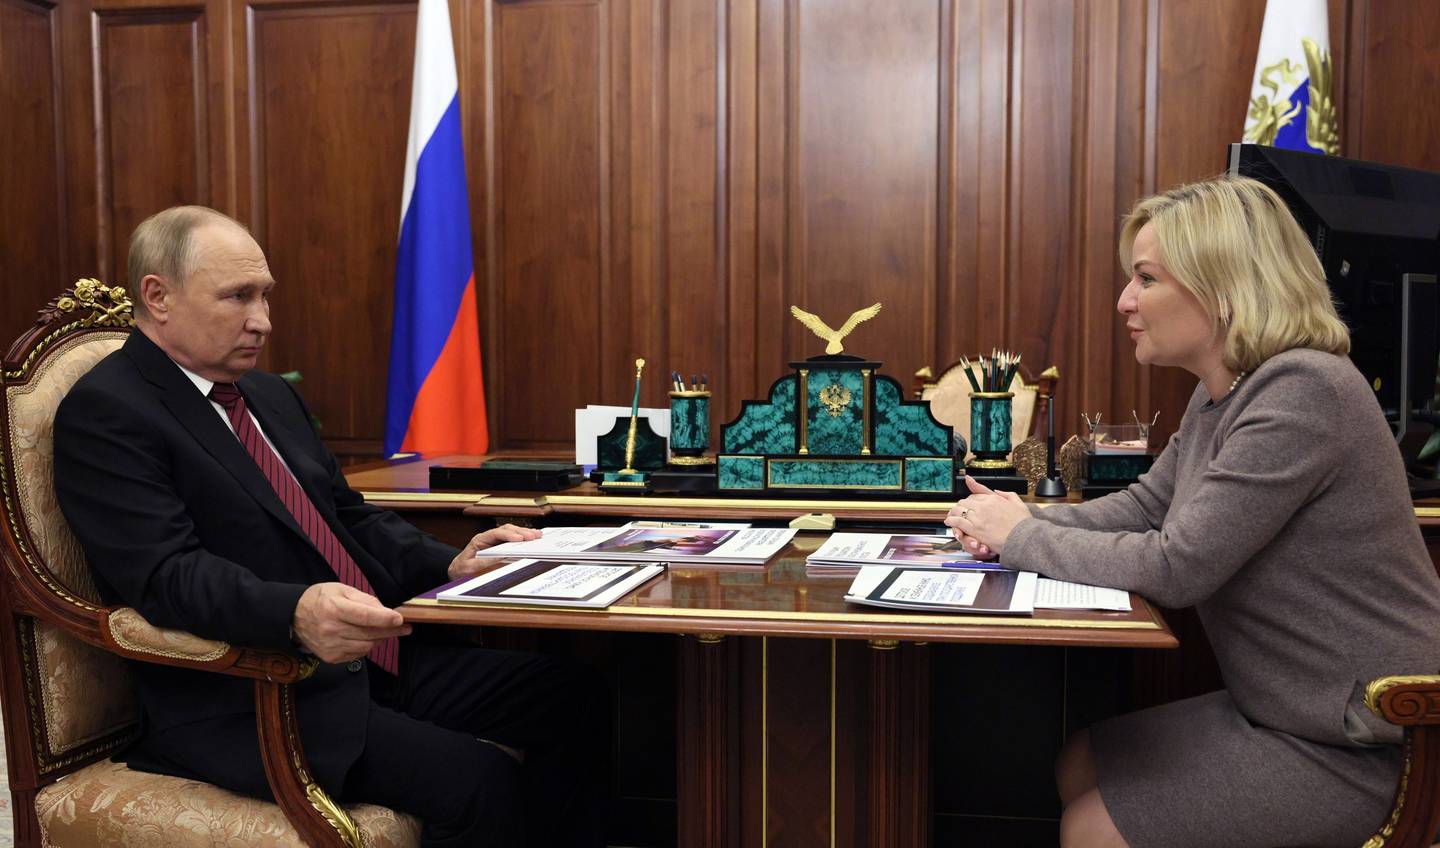 Russian President Vladimir Putin listens to Russian Culture Minister Olga Lyubimova during their meeting in Moscow, Russia, Oct. 3, 2022.